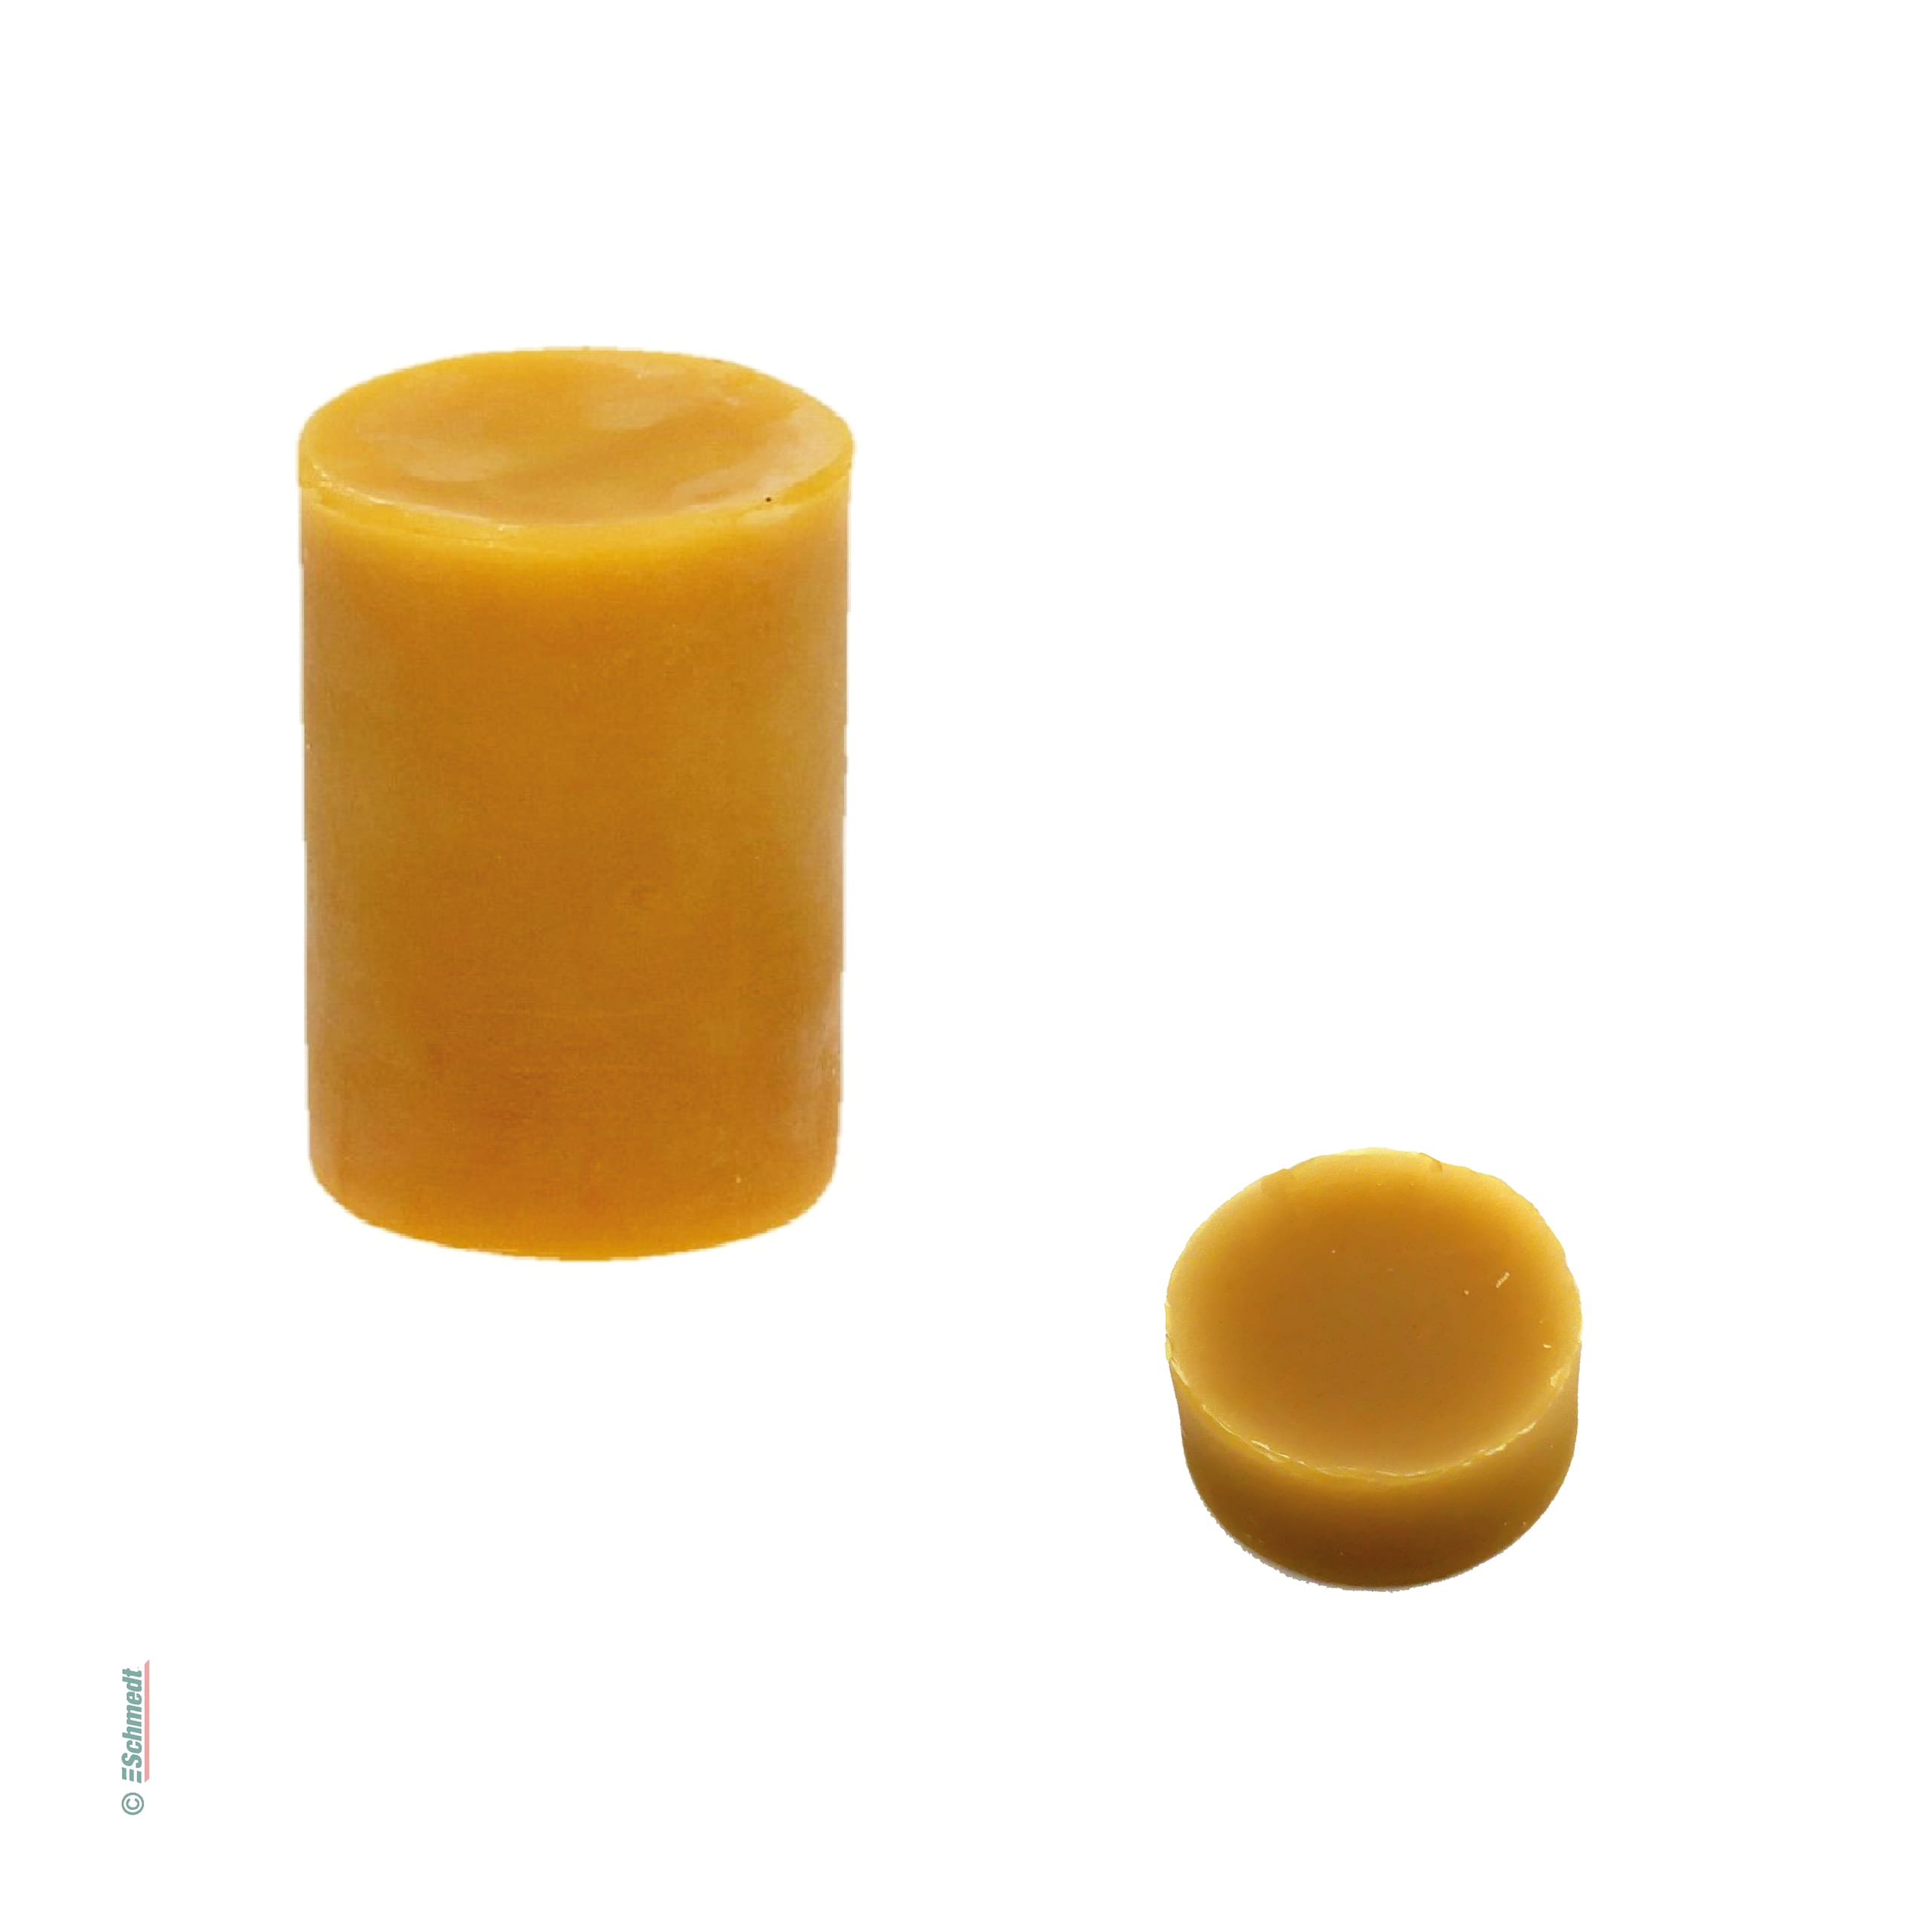 Beeswax - for manual sewing - for waxing the sewing thread for easier sewing...